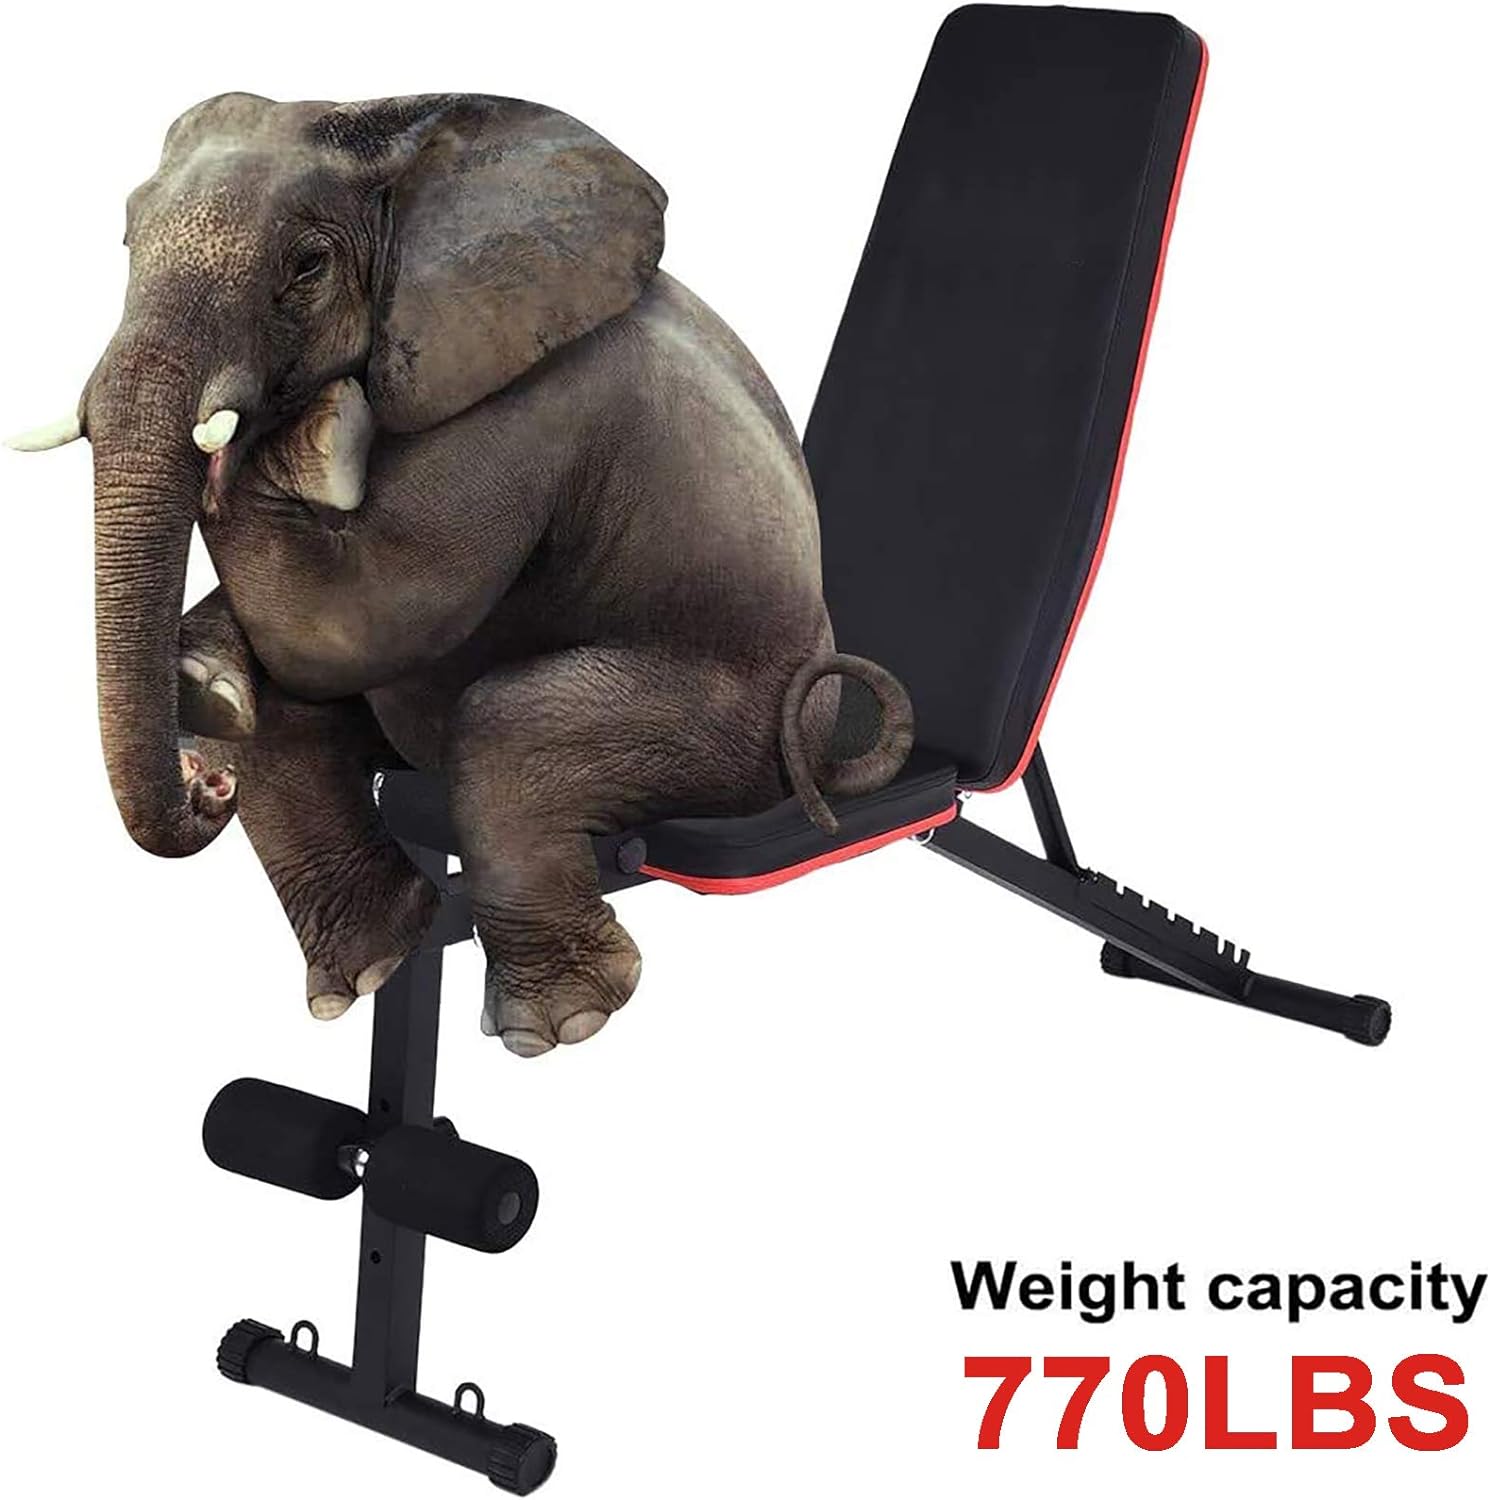 Yizc Adjustable Weight Bench Review